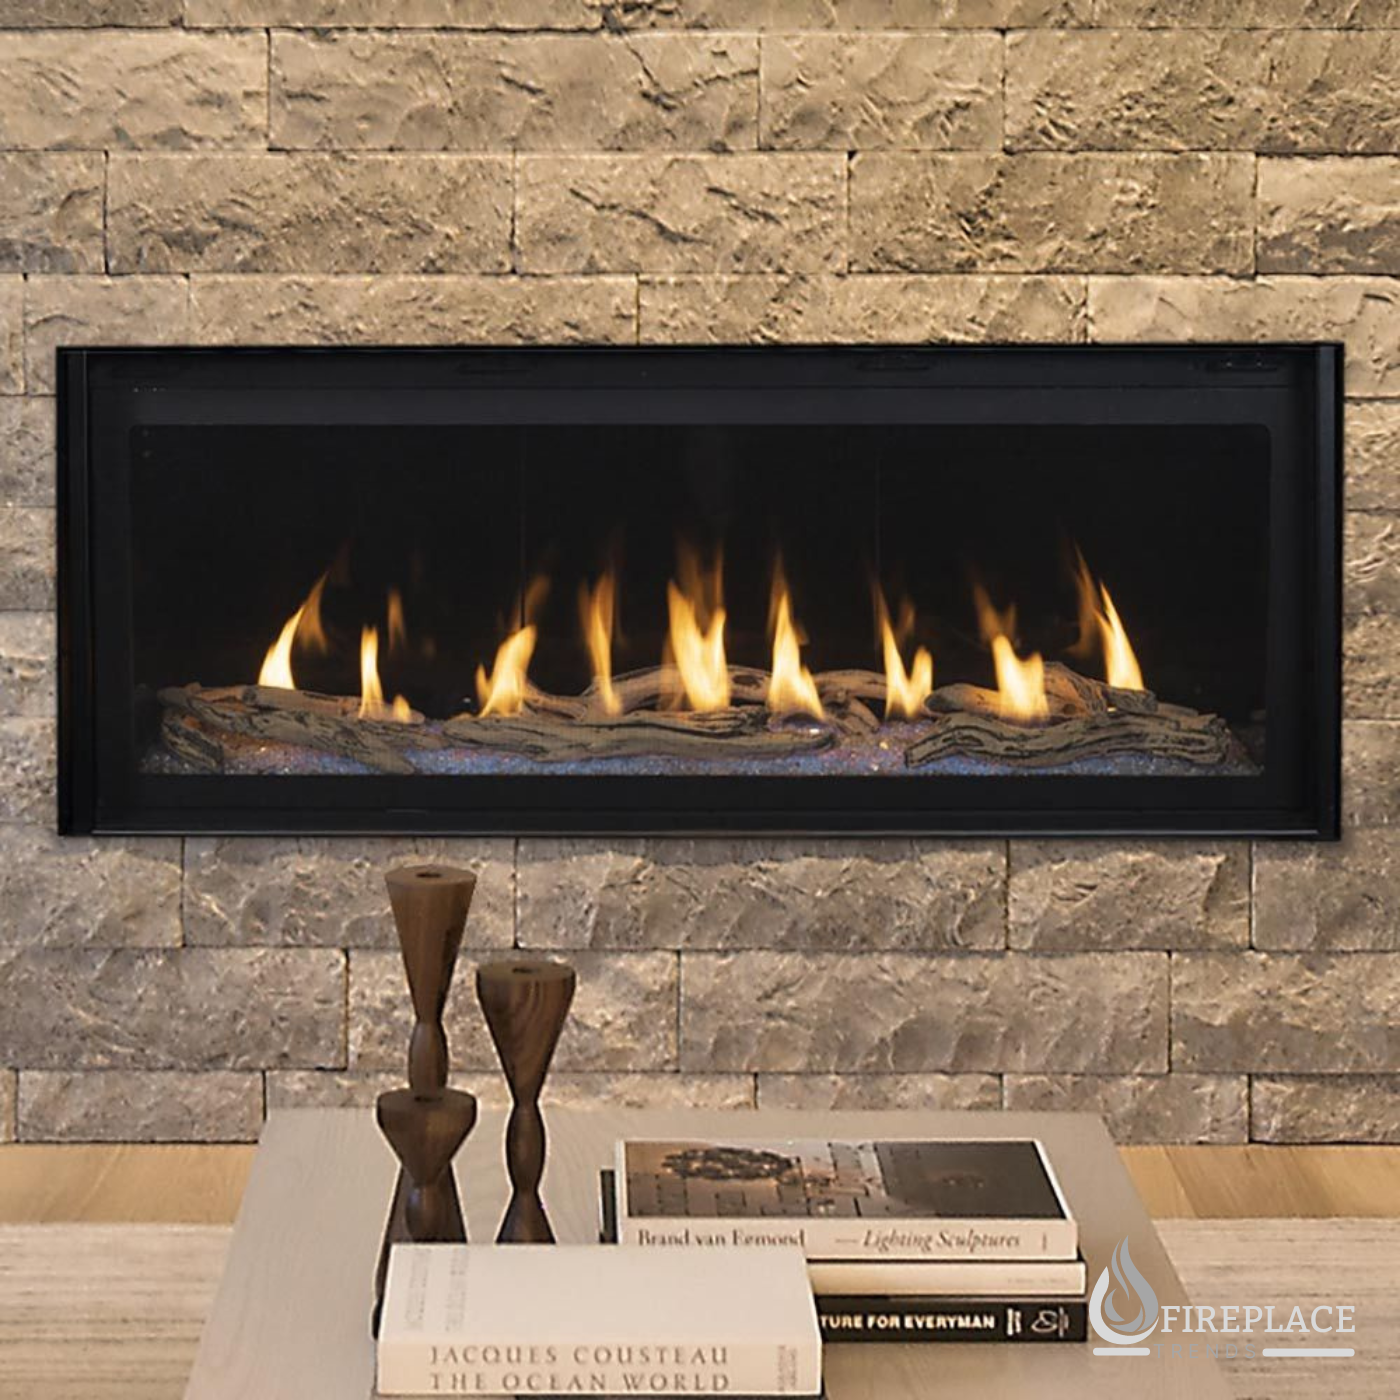 Superior - 60" - Electronic Ignition, Lights Direct Vent Linear Gas Fireplace - DRL 6000 Series